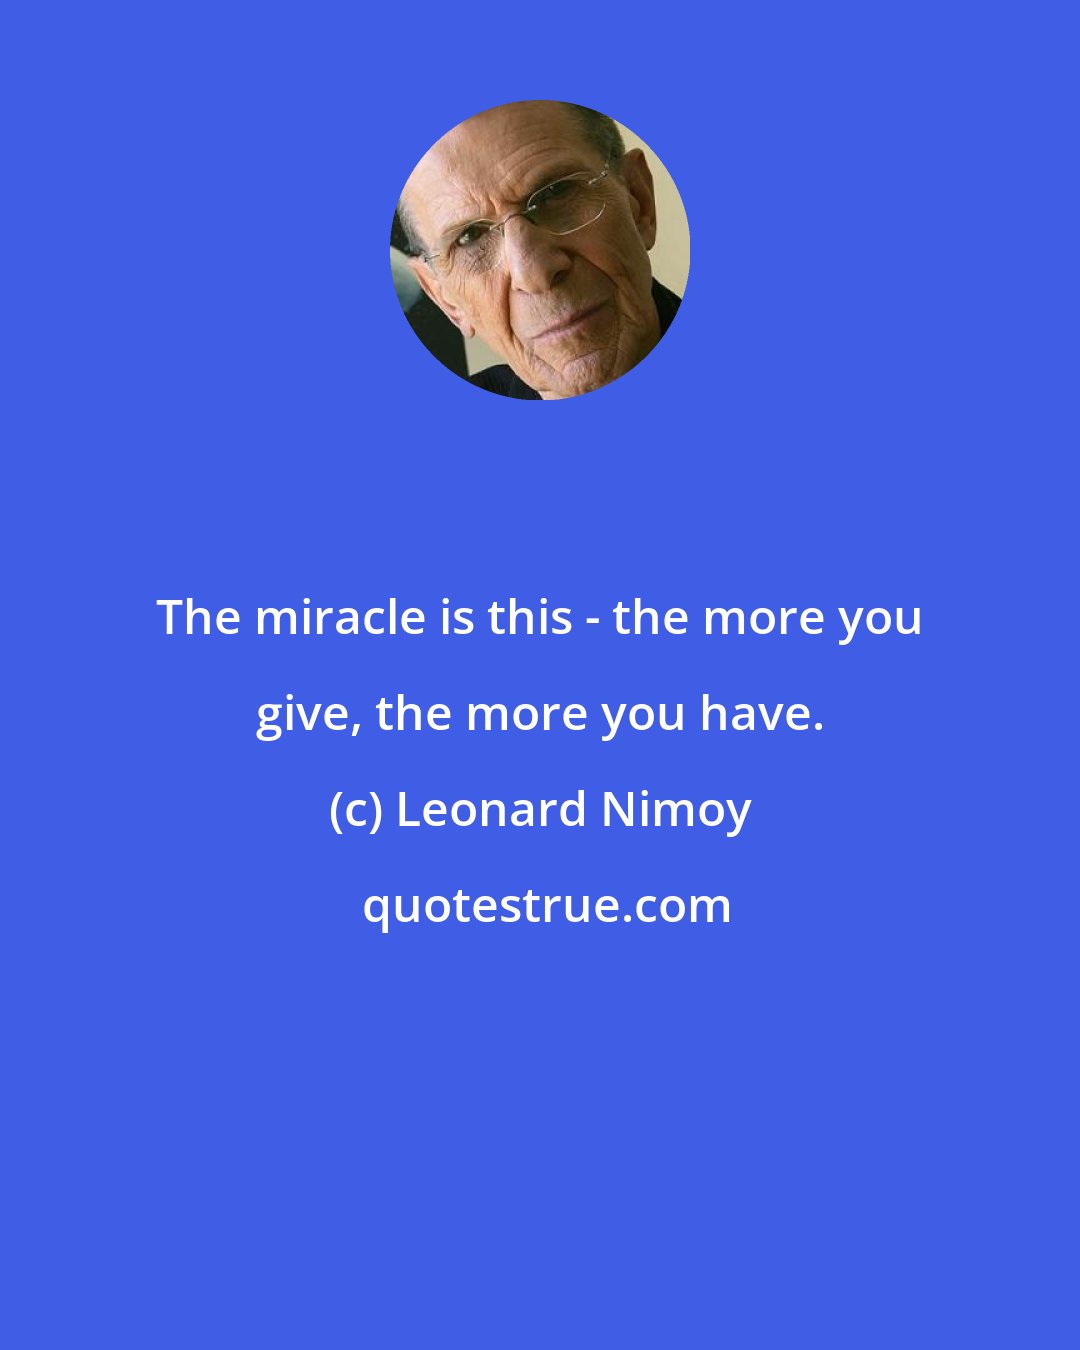 Leonard Nimoy: The miracle is this - the more you give, the more you have.